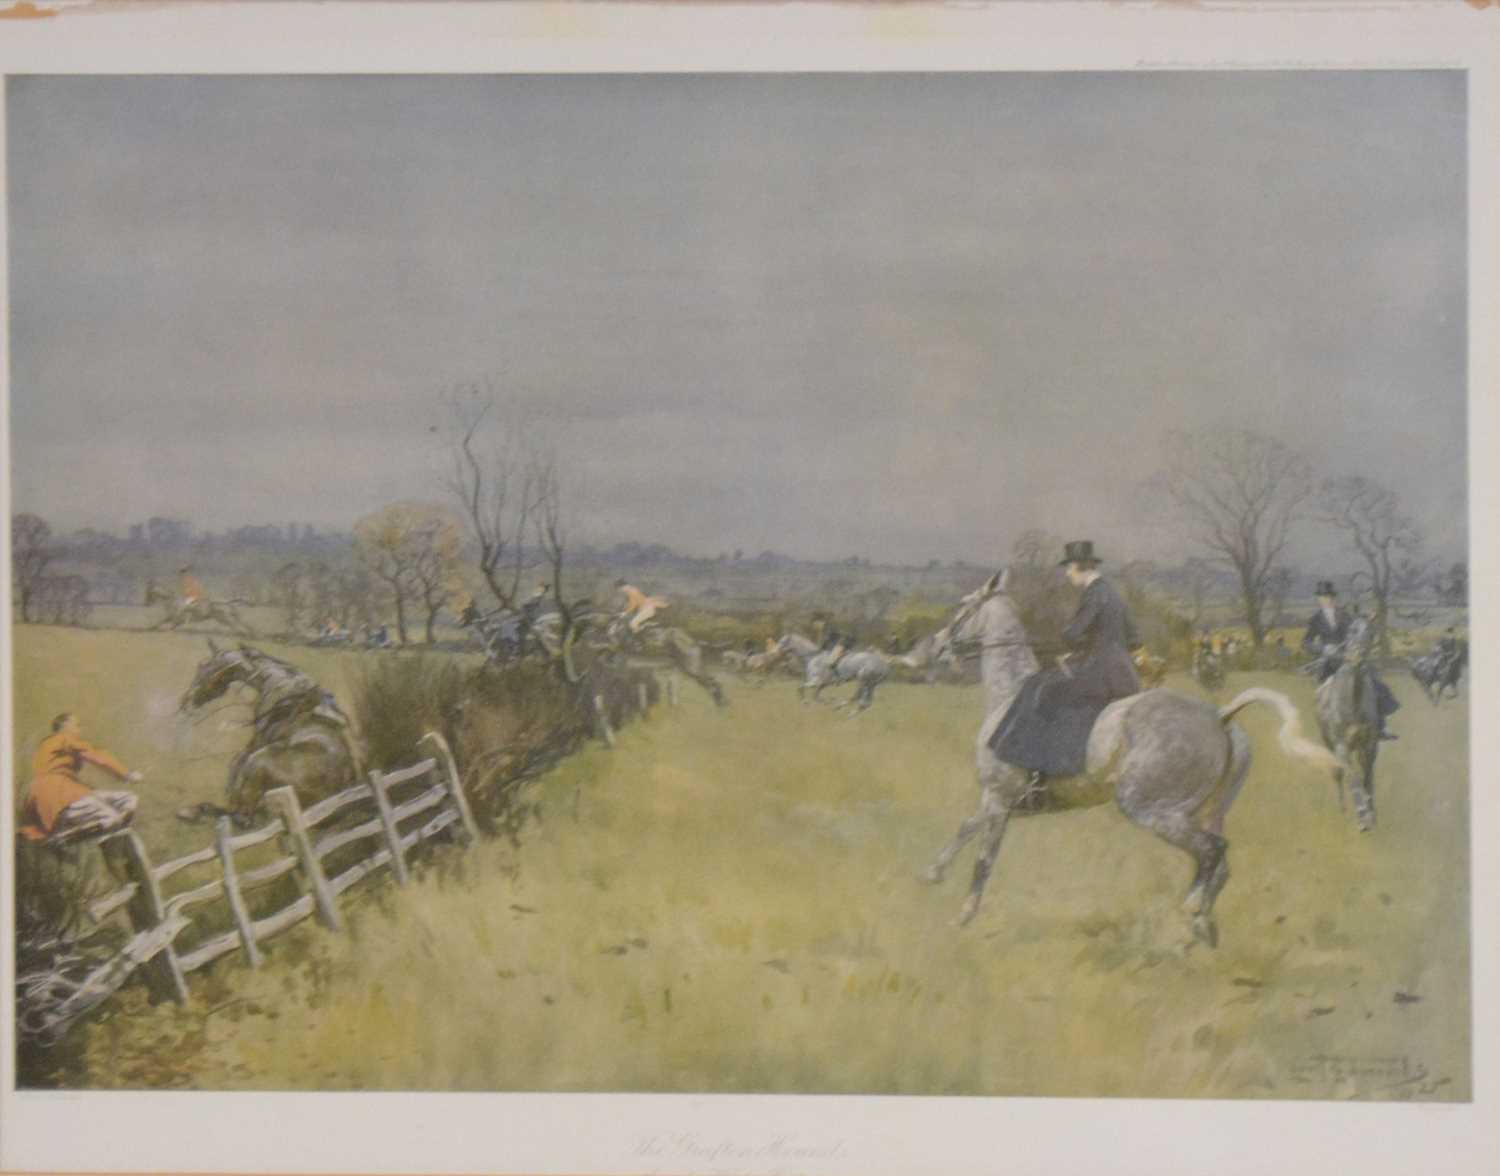 After Lionel Edwards, Hunting Countries - The Cotswold and The Waddon Chase, and other prints. - Image 7 of 14